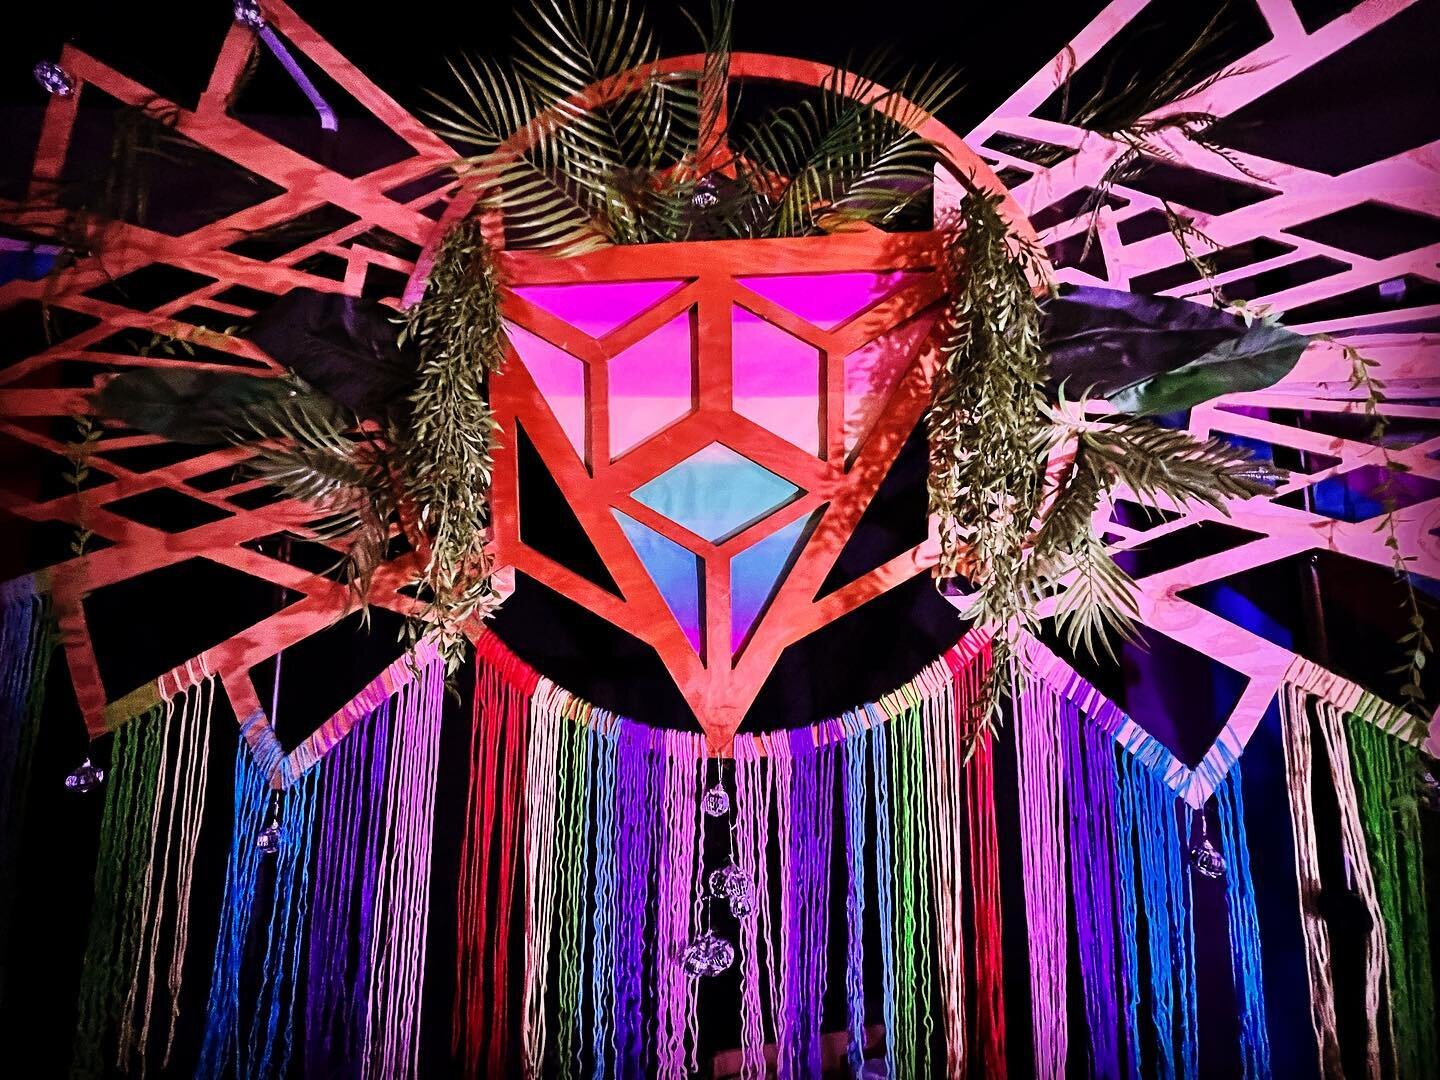 🌈Gather your people in the name of #music and #love 🌈 This prismatic stage created for @npt_haus @hausofcodec @neptunehaus_ @nptout in collaboration with @operationivy @itsmekatiemariee @magneticmelt11 and @soundzorganic @funktiononeofficial We ded